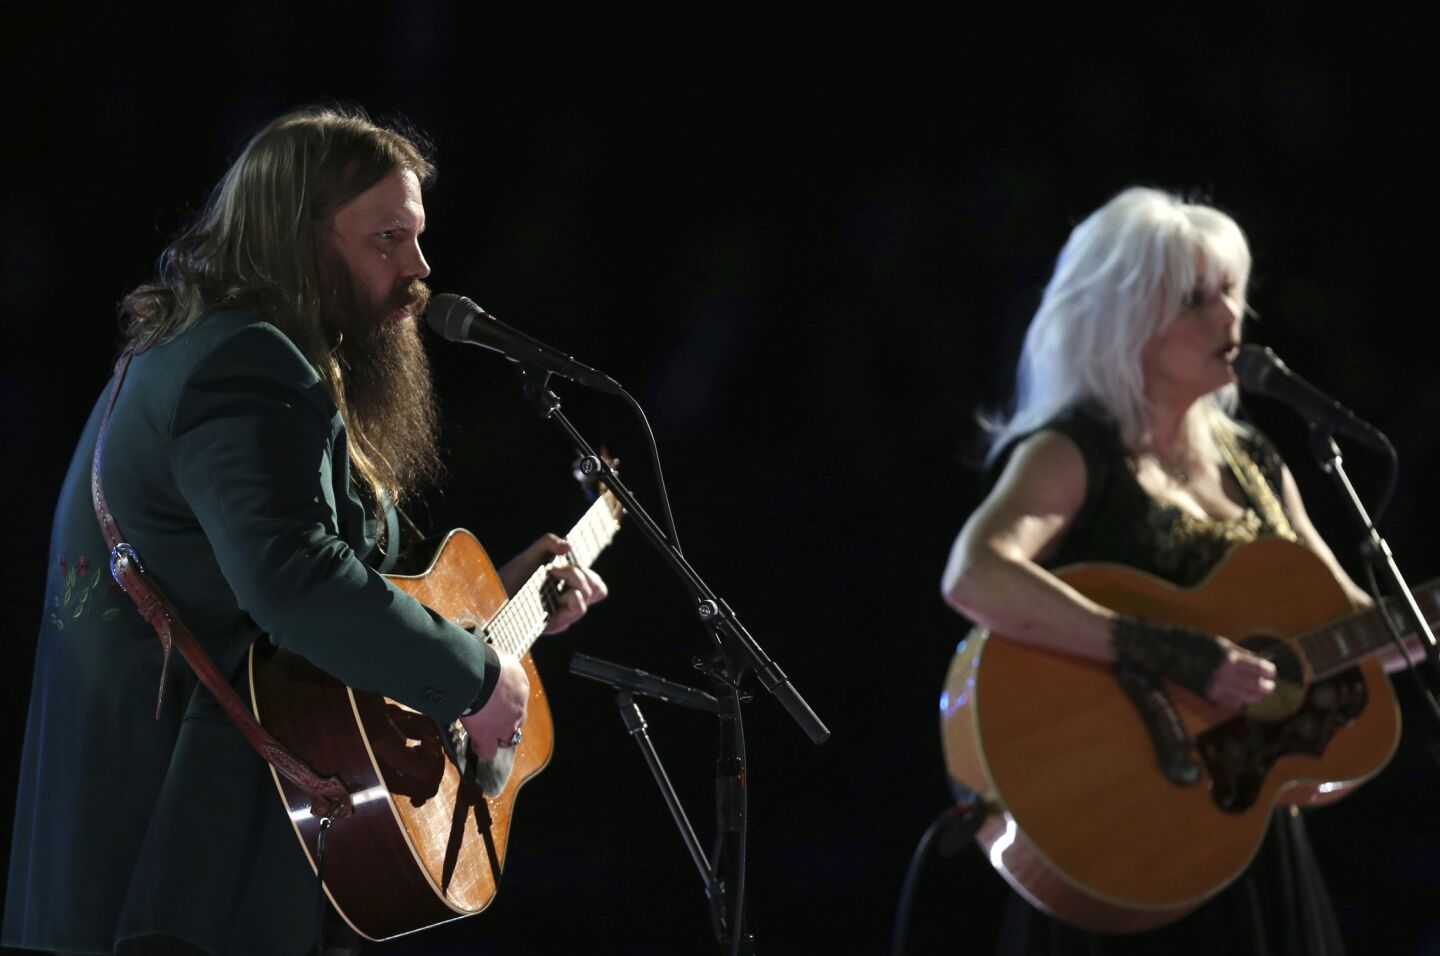 Chris Stapleton and Emmylou Harris perform "Wildflowers" during an in memoriam tribute to Tom Petty.